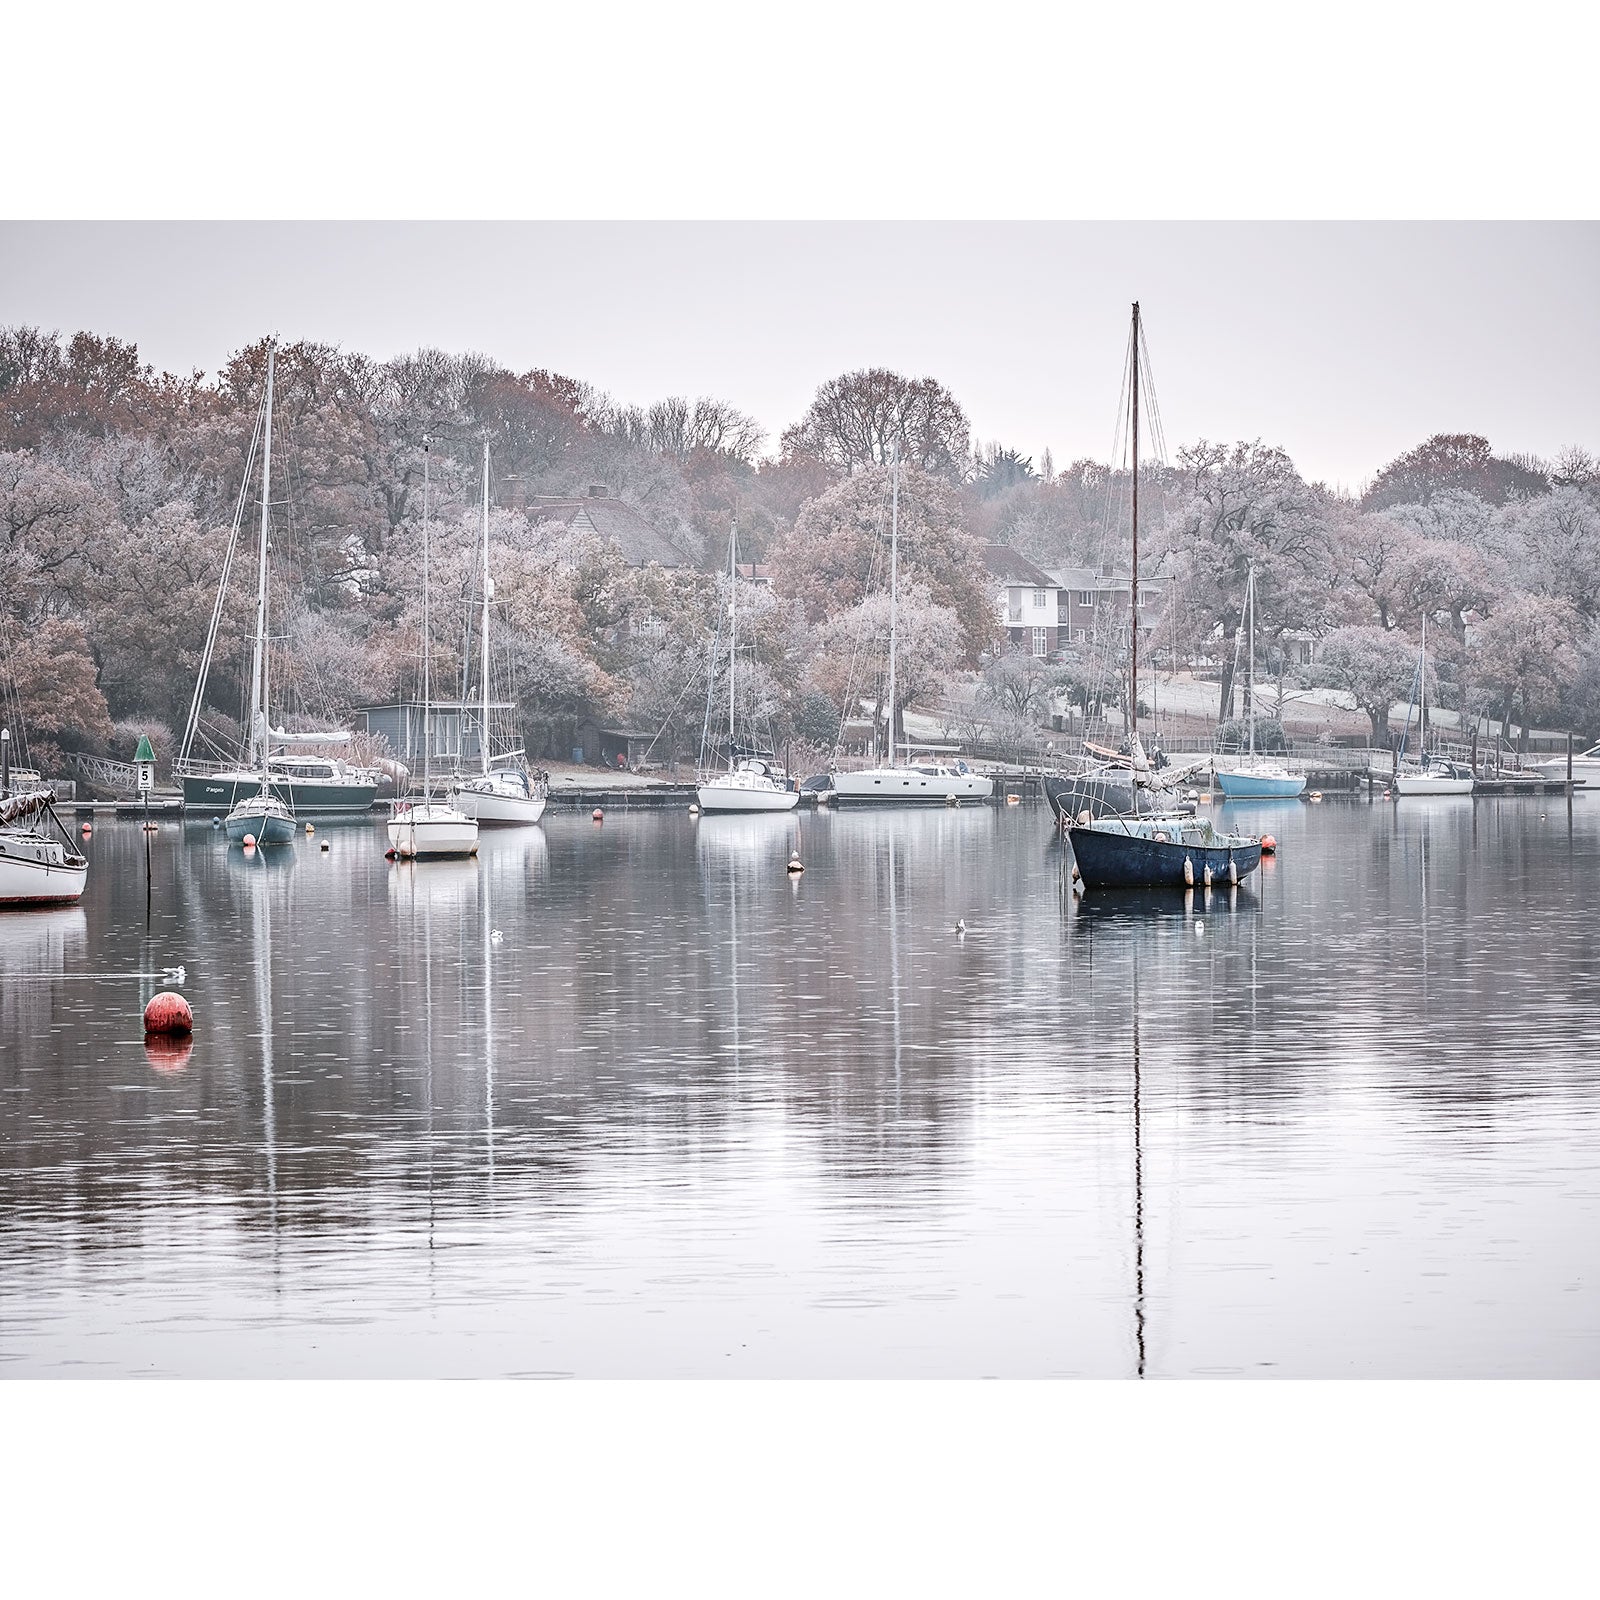 Tranquil Wootton Creek on the Isle of Wight on a misty morning with moored sailboats and bare trees captured by Available Light Photography.